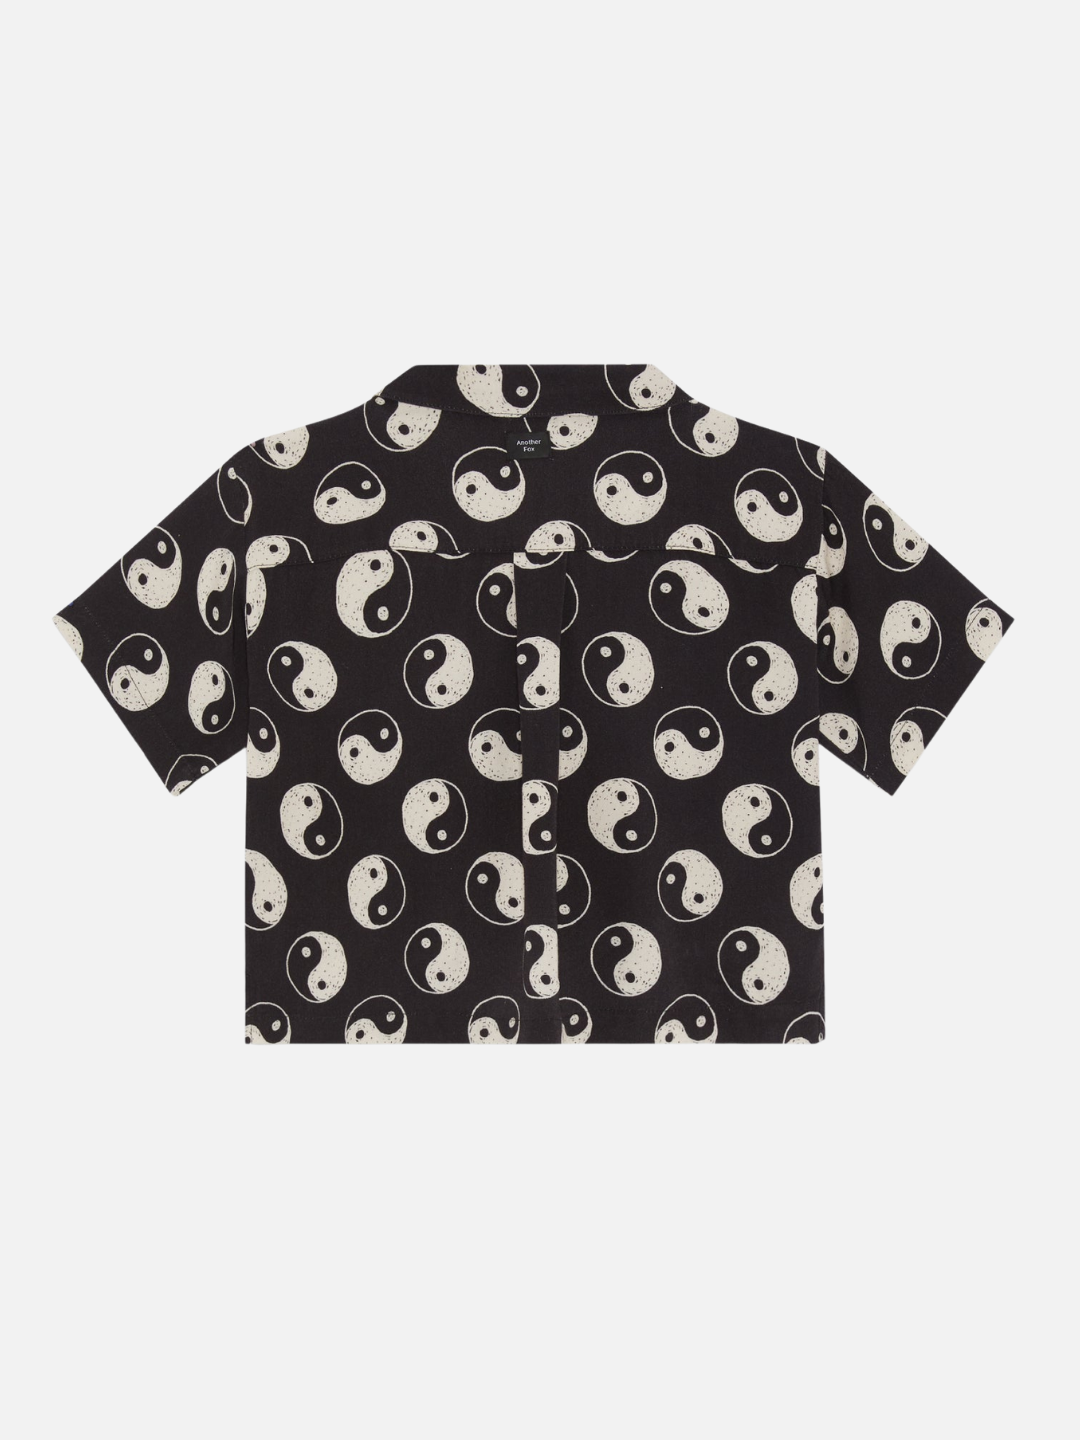 A back view of the black button up shirt with a yin and yang pattern all over.